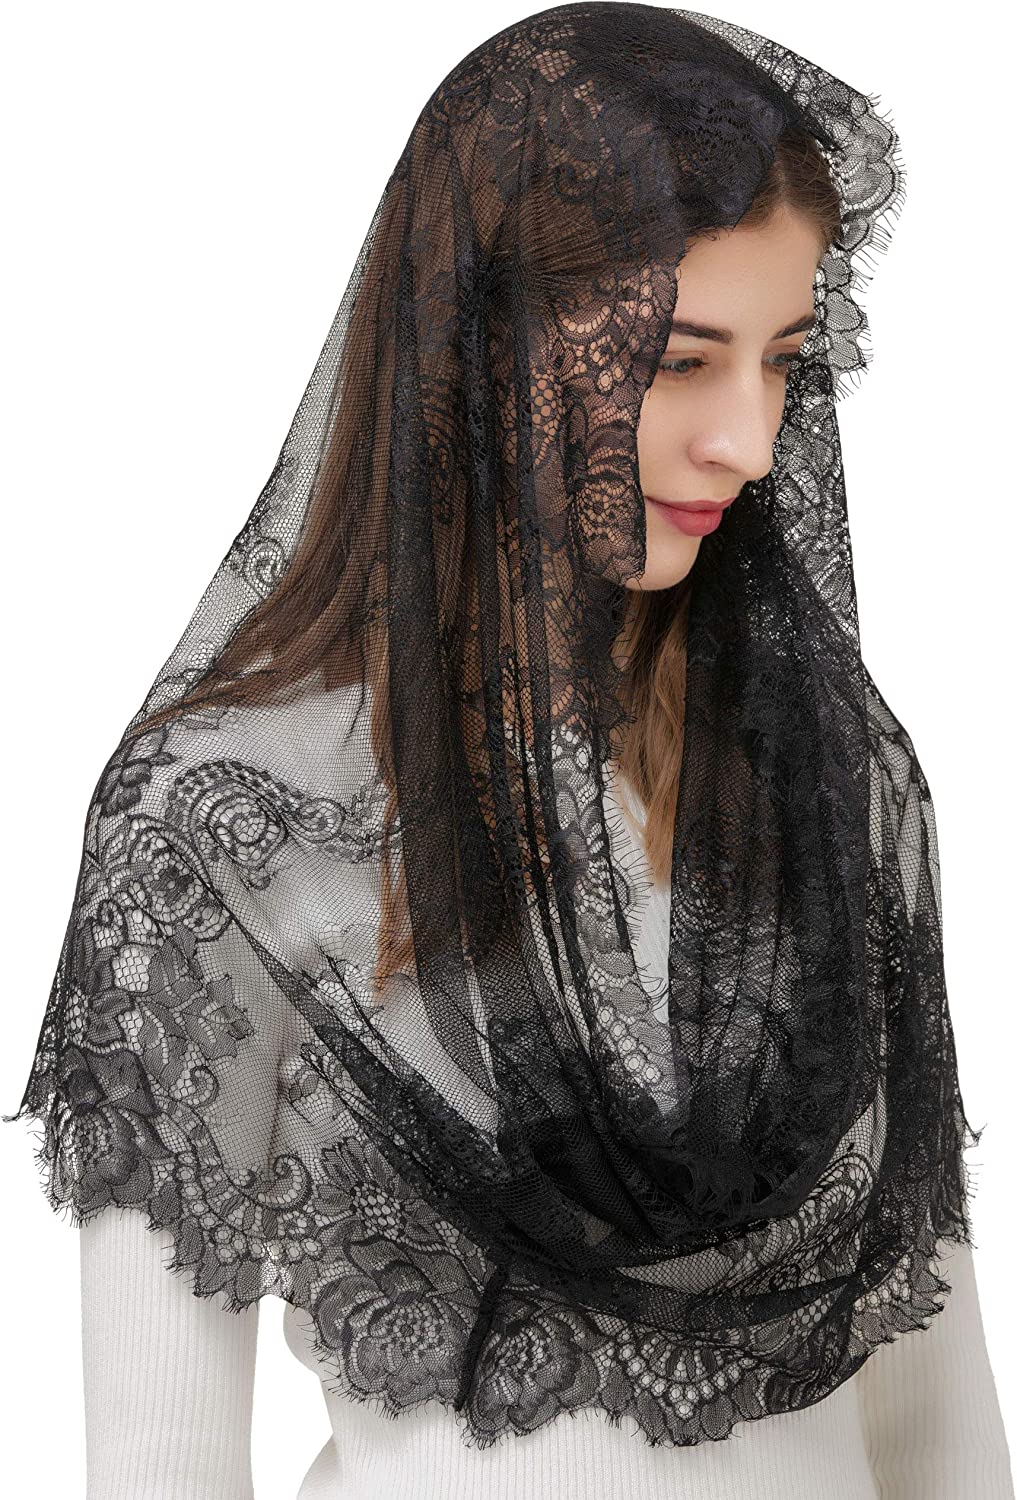 Pamor for Infinity Church Veil Floral Latin Mass for Head Covering